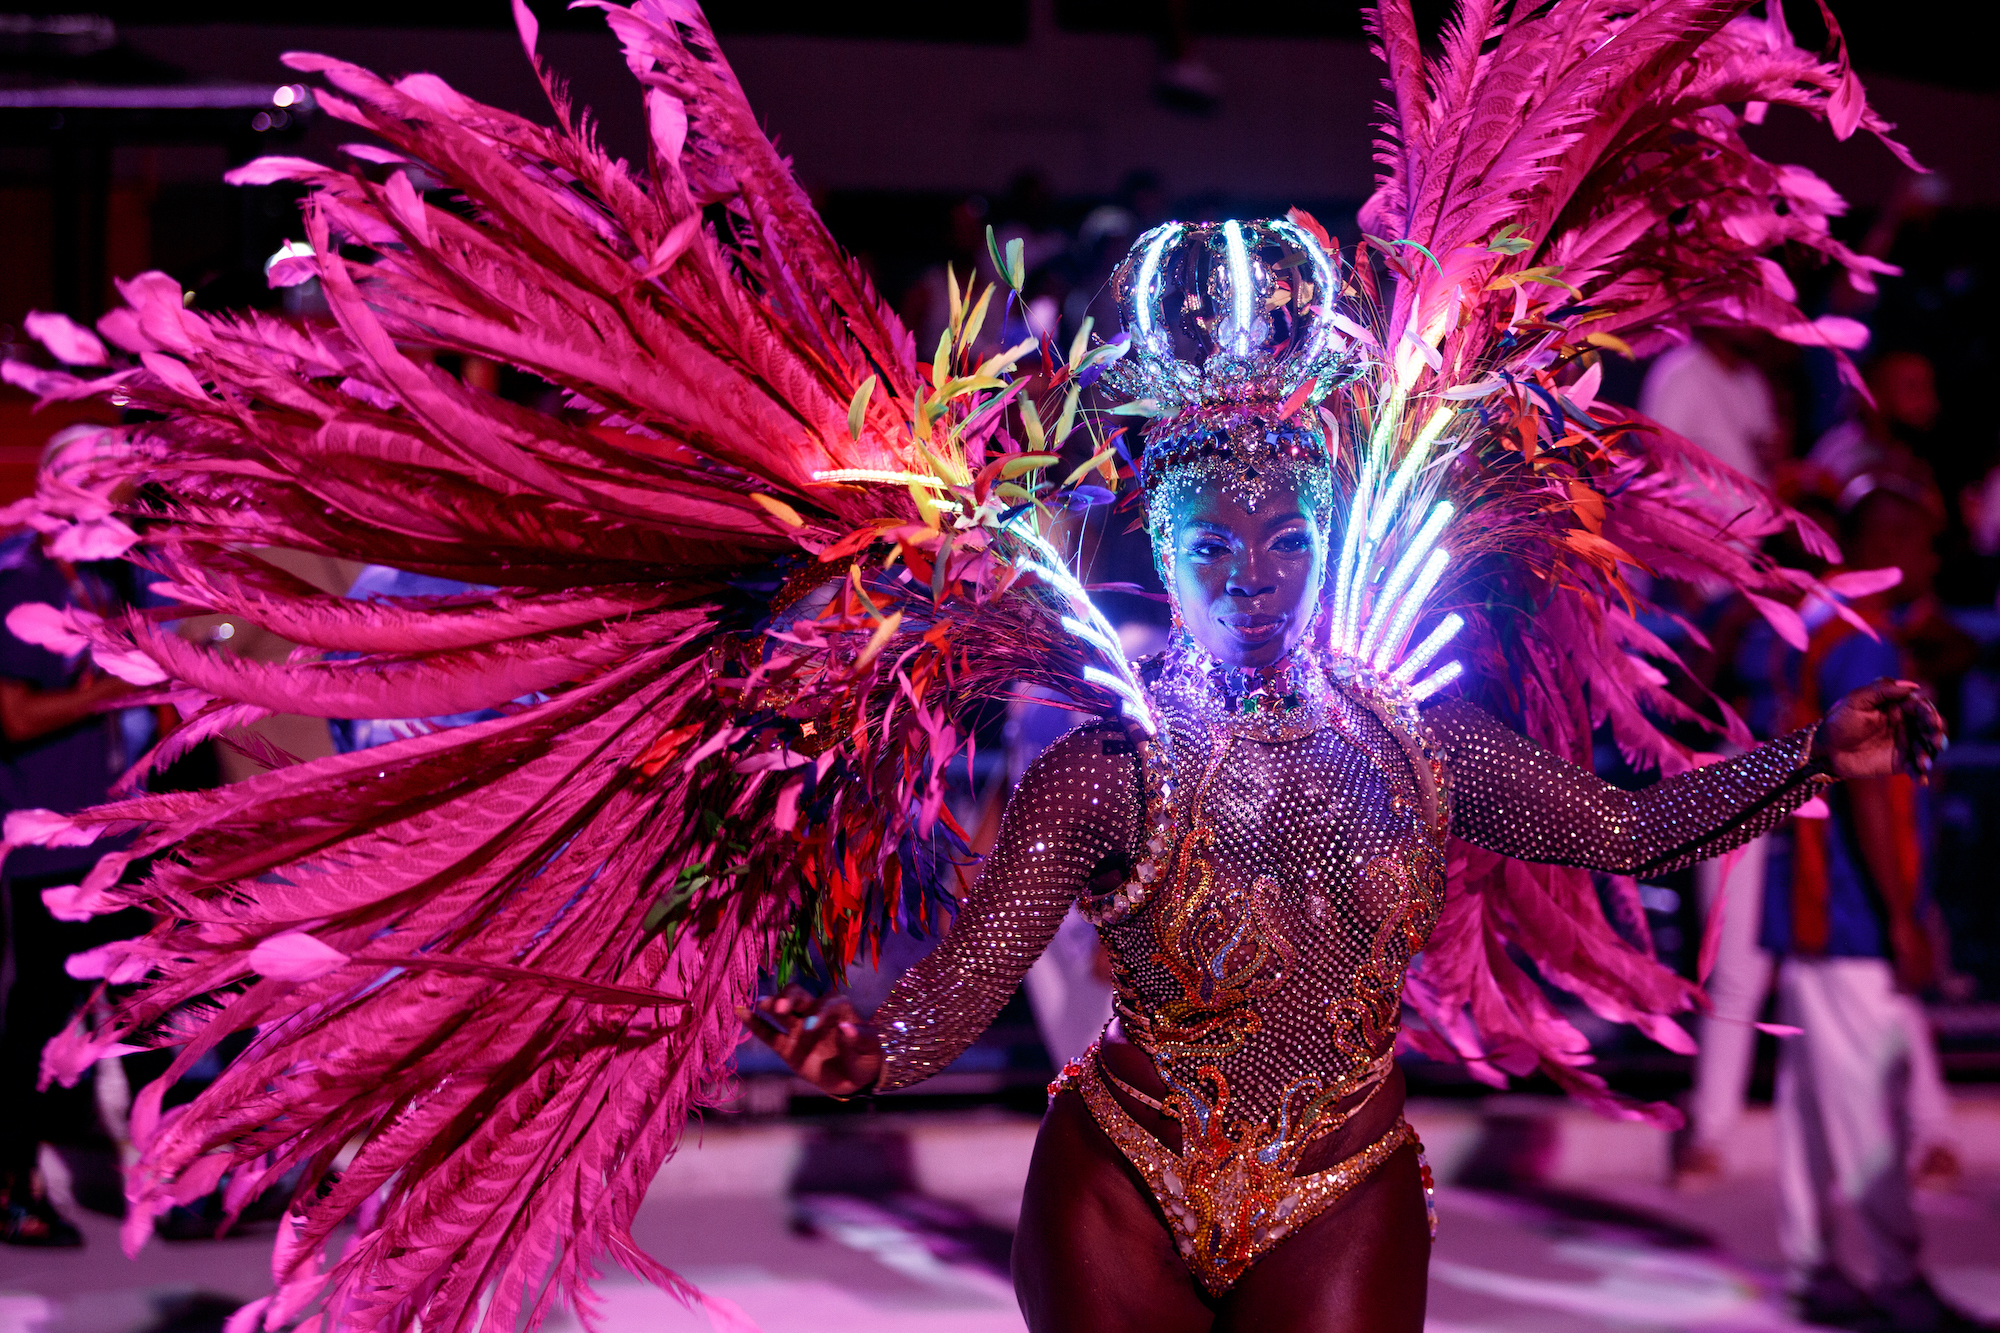 Brazil’s glitzy Carnival is back in full swing after the pandemic